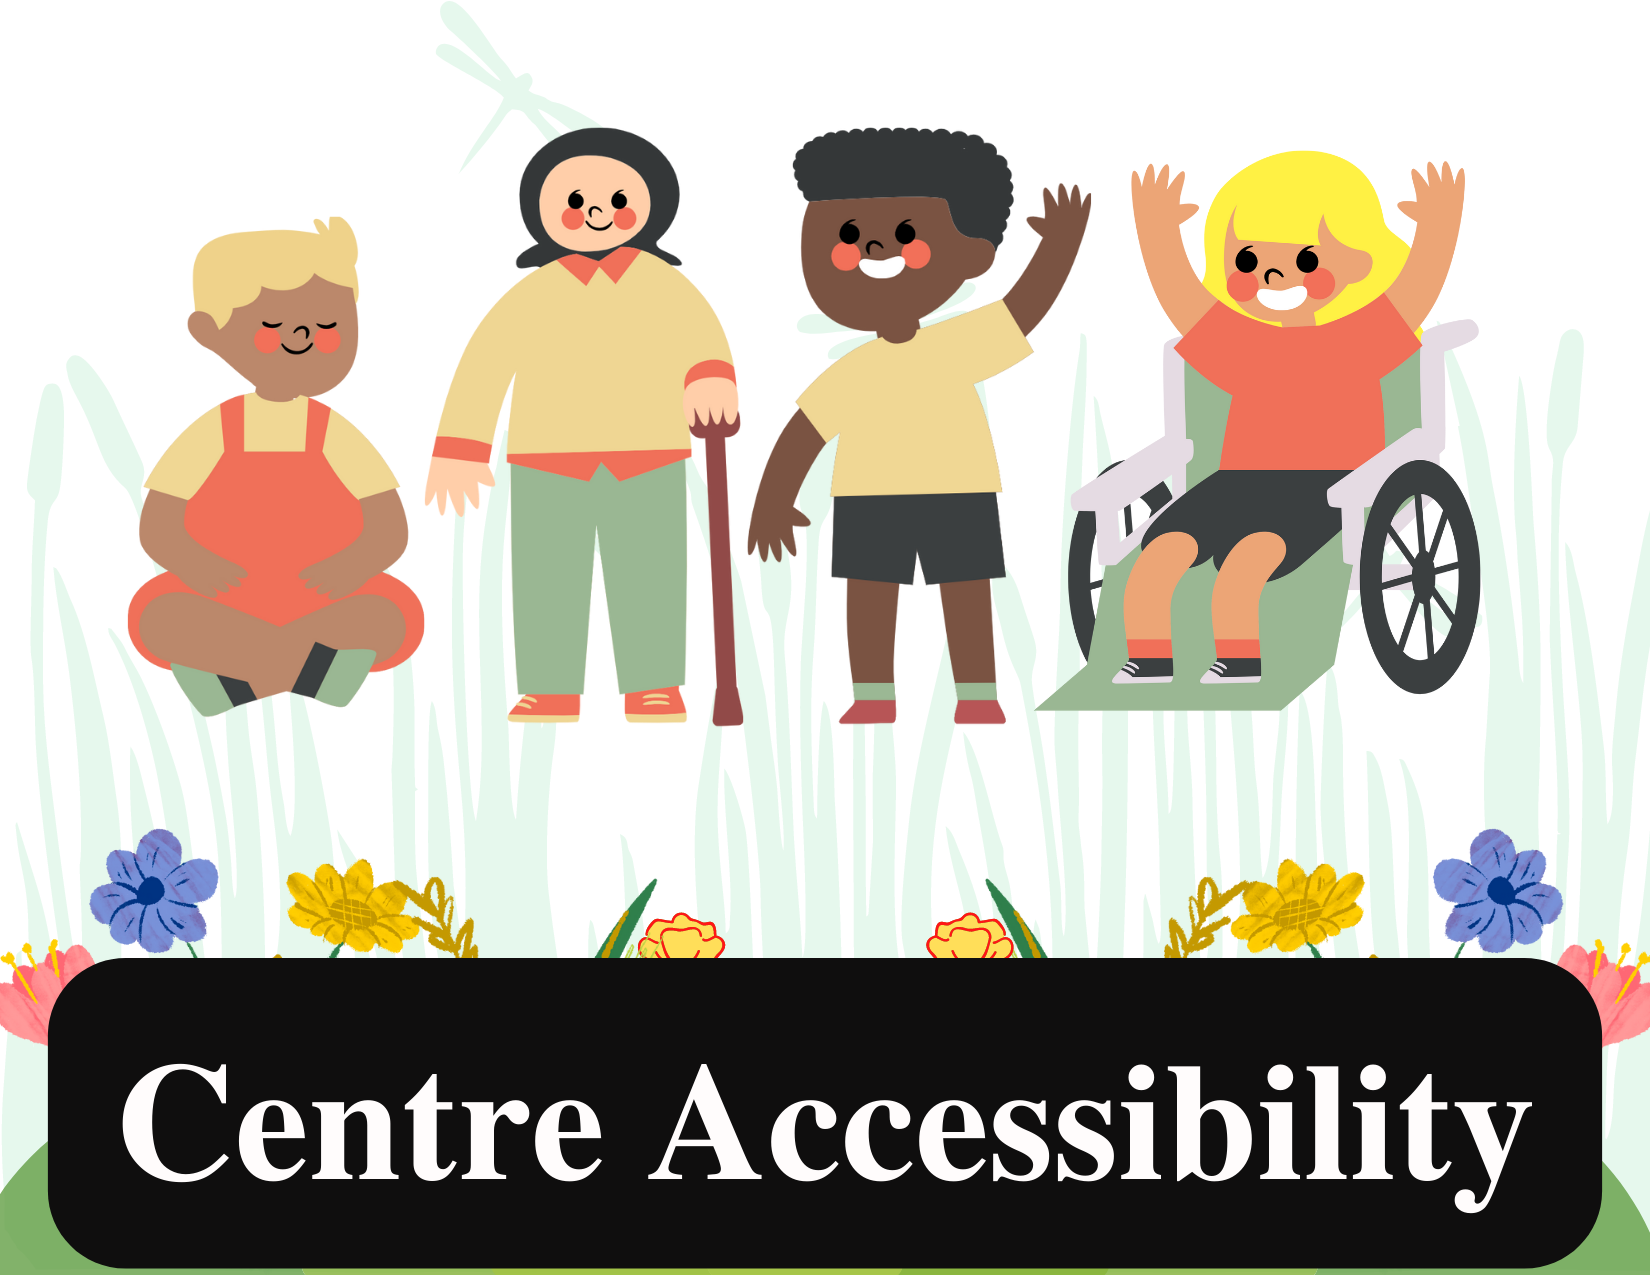 4 cartoon kids, image is followed from a boy on the left side is sitting down, middle left is a girl wearing a hijab (head scarf) with a cane on her left hand, middle right is a boy with one hand waving, right side is a girl with both her hands up on a wheelchair. 